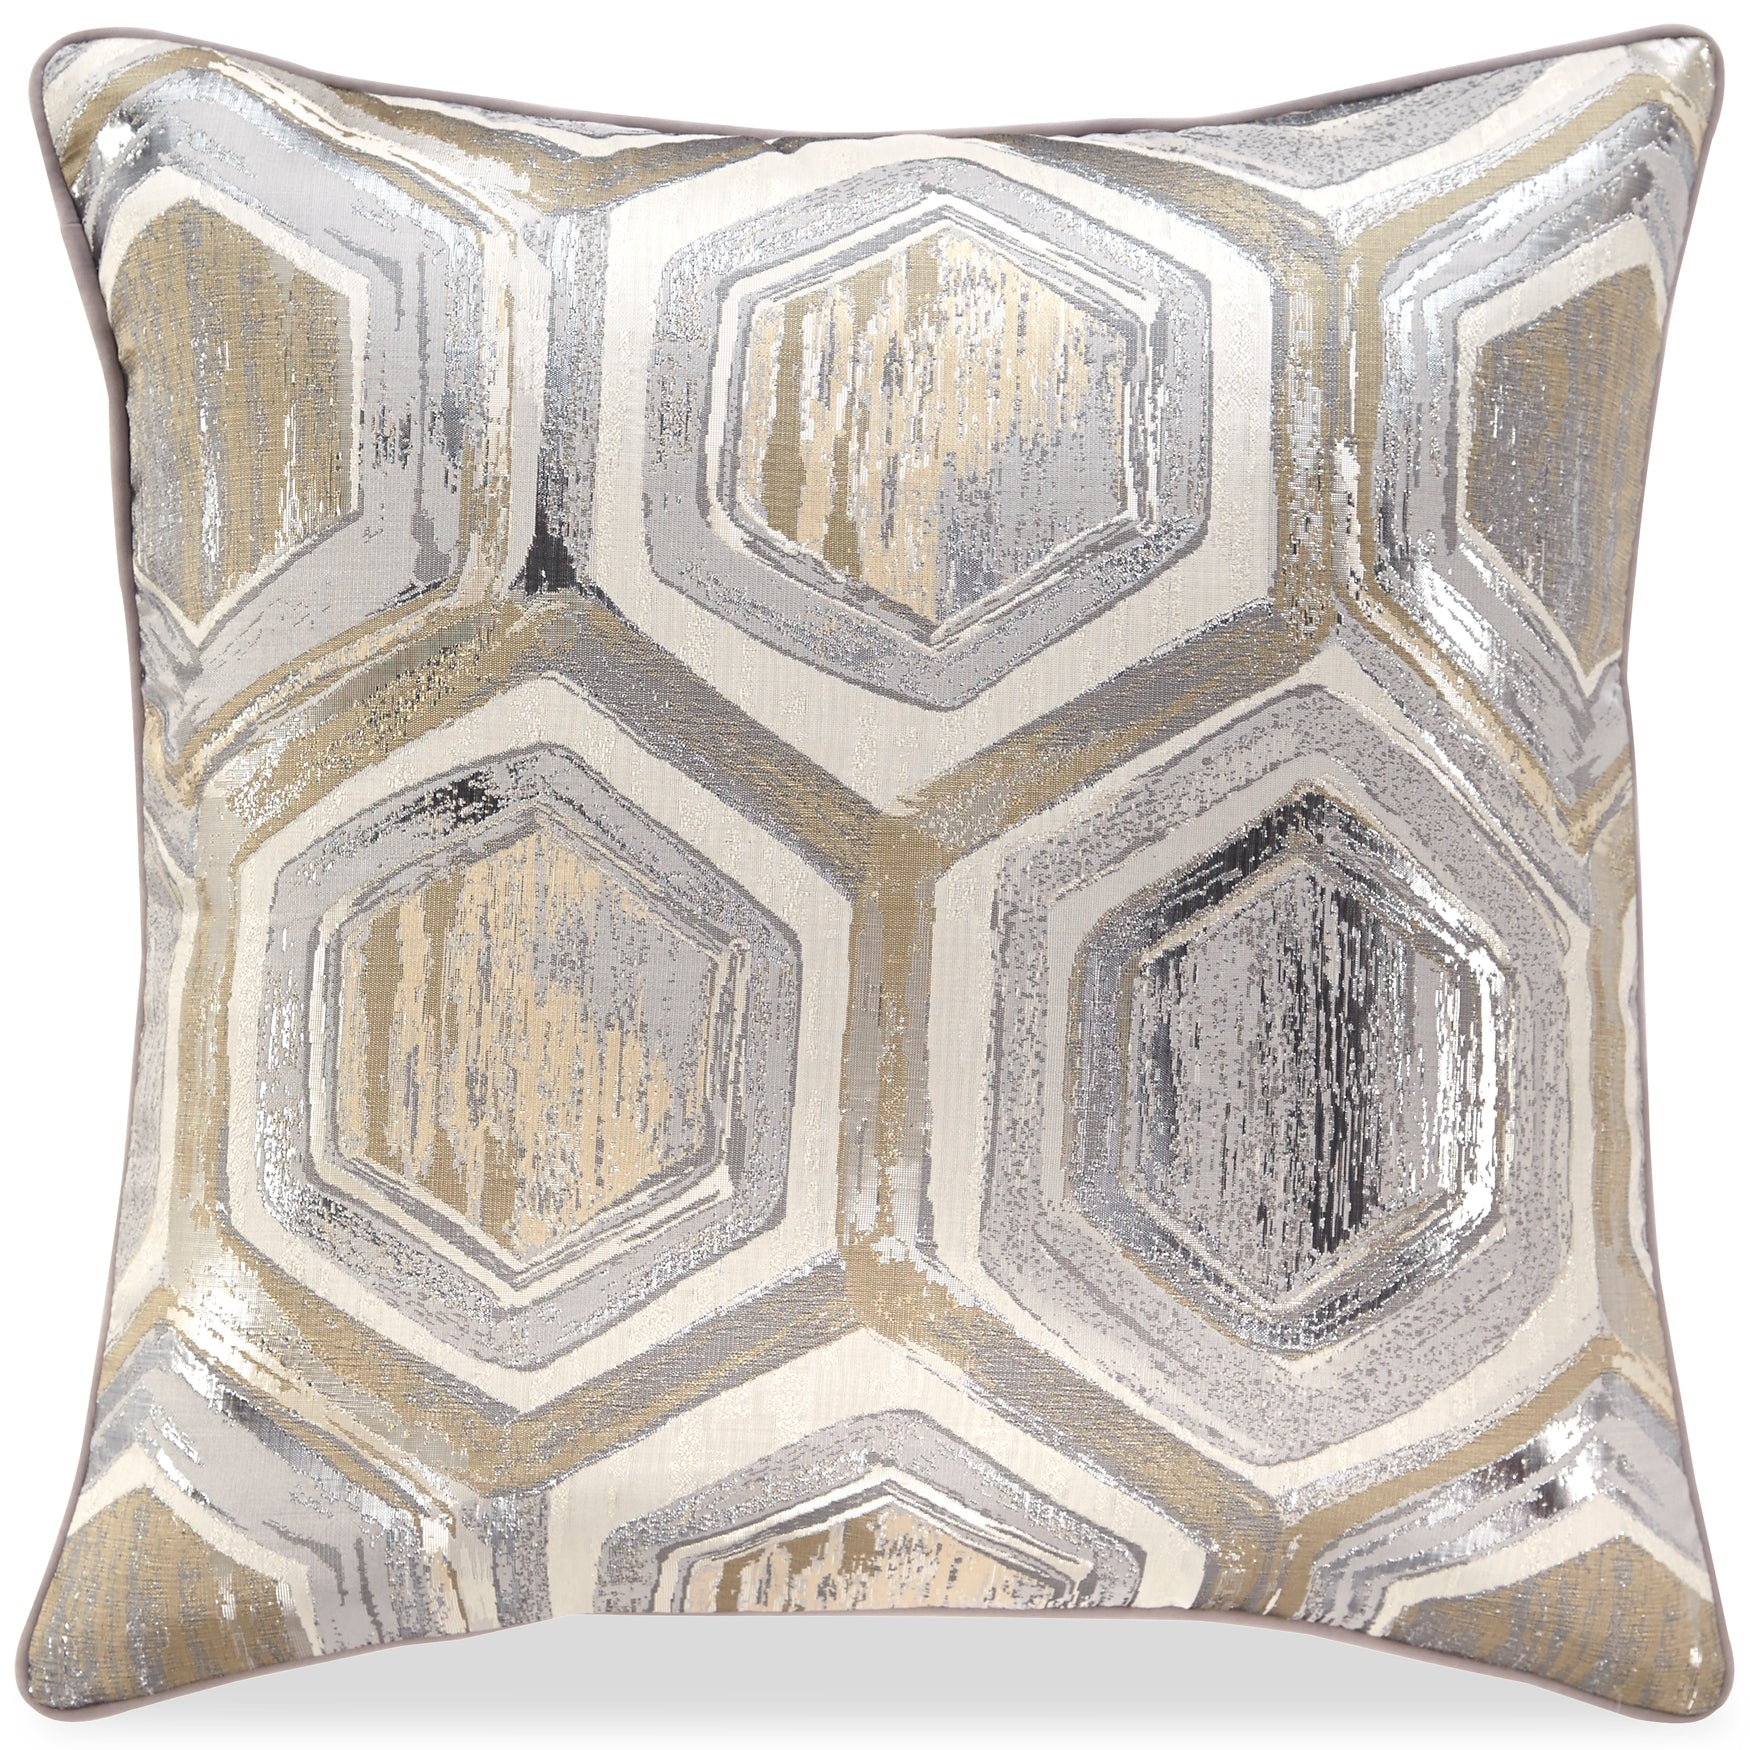 Meiling Pillow JB's Furniture  Home Furniture, Home Decor, Furniture Store